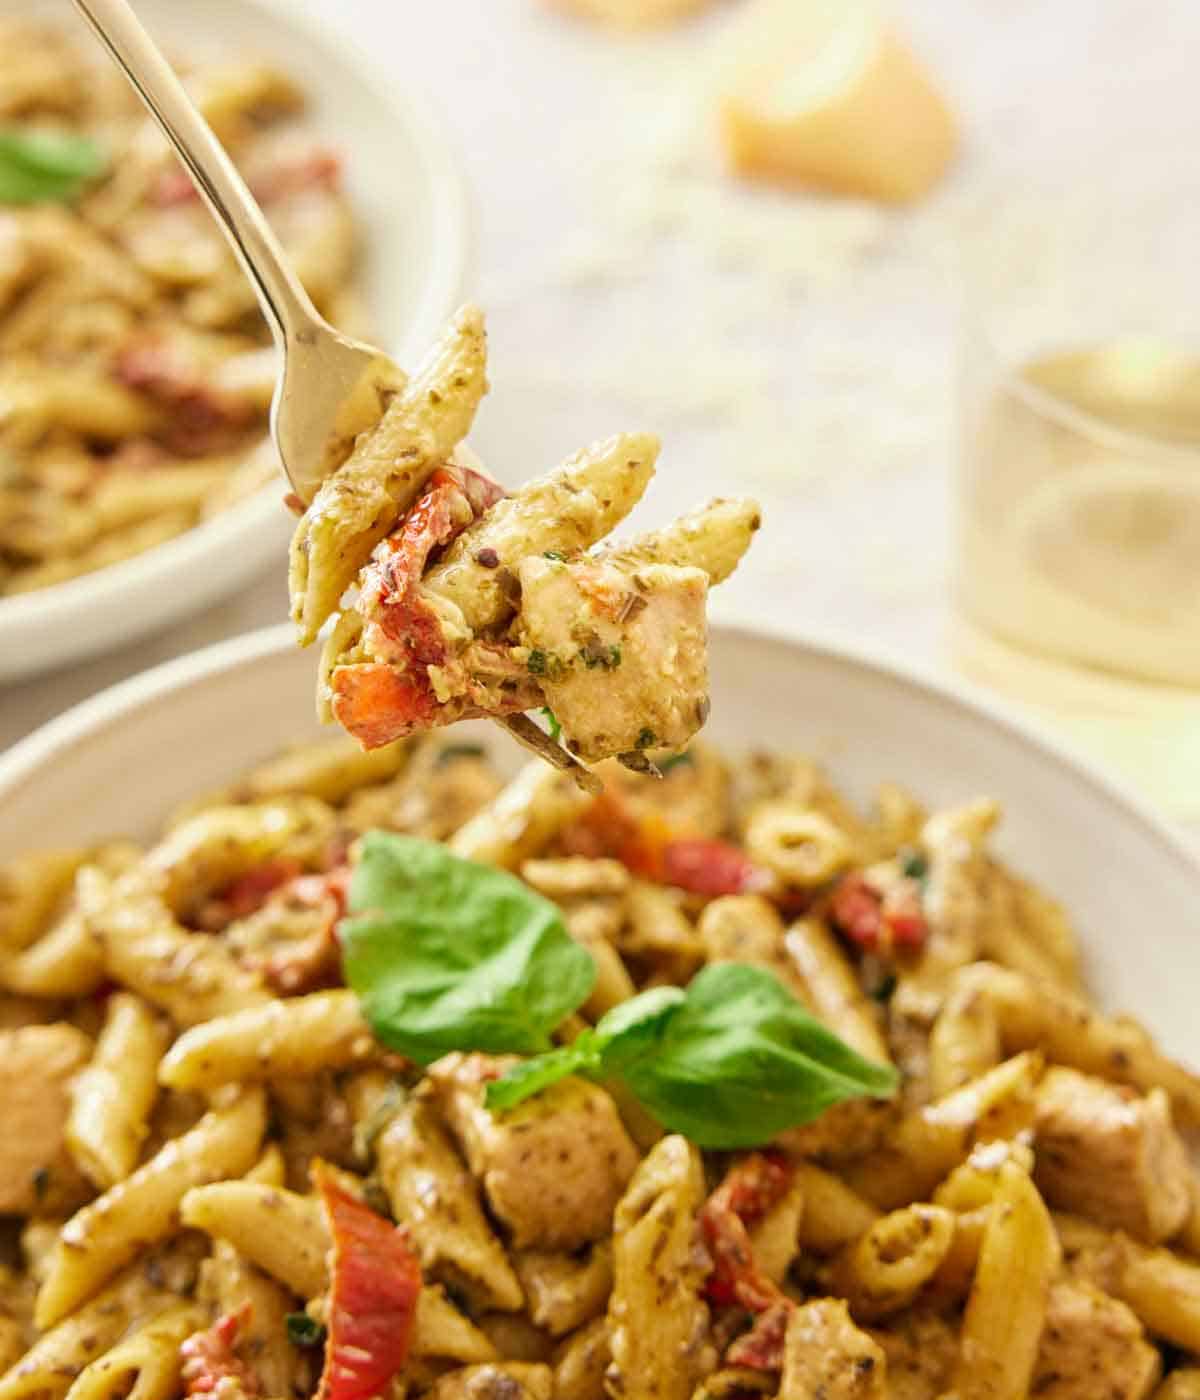 A forkful of chicken pesto pasta lifted up from the plate.